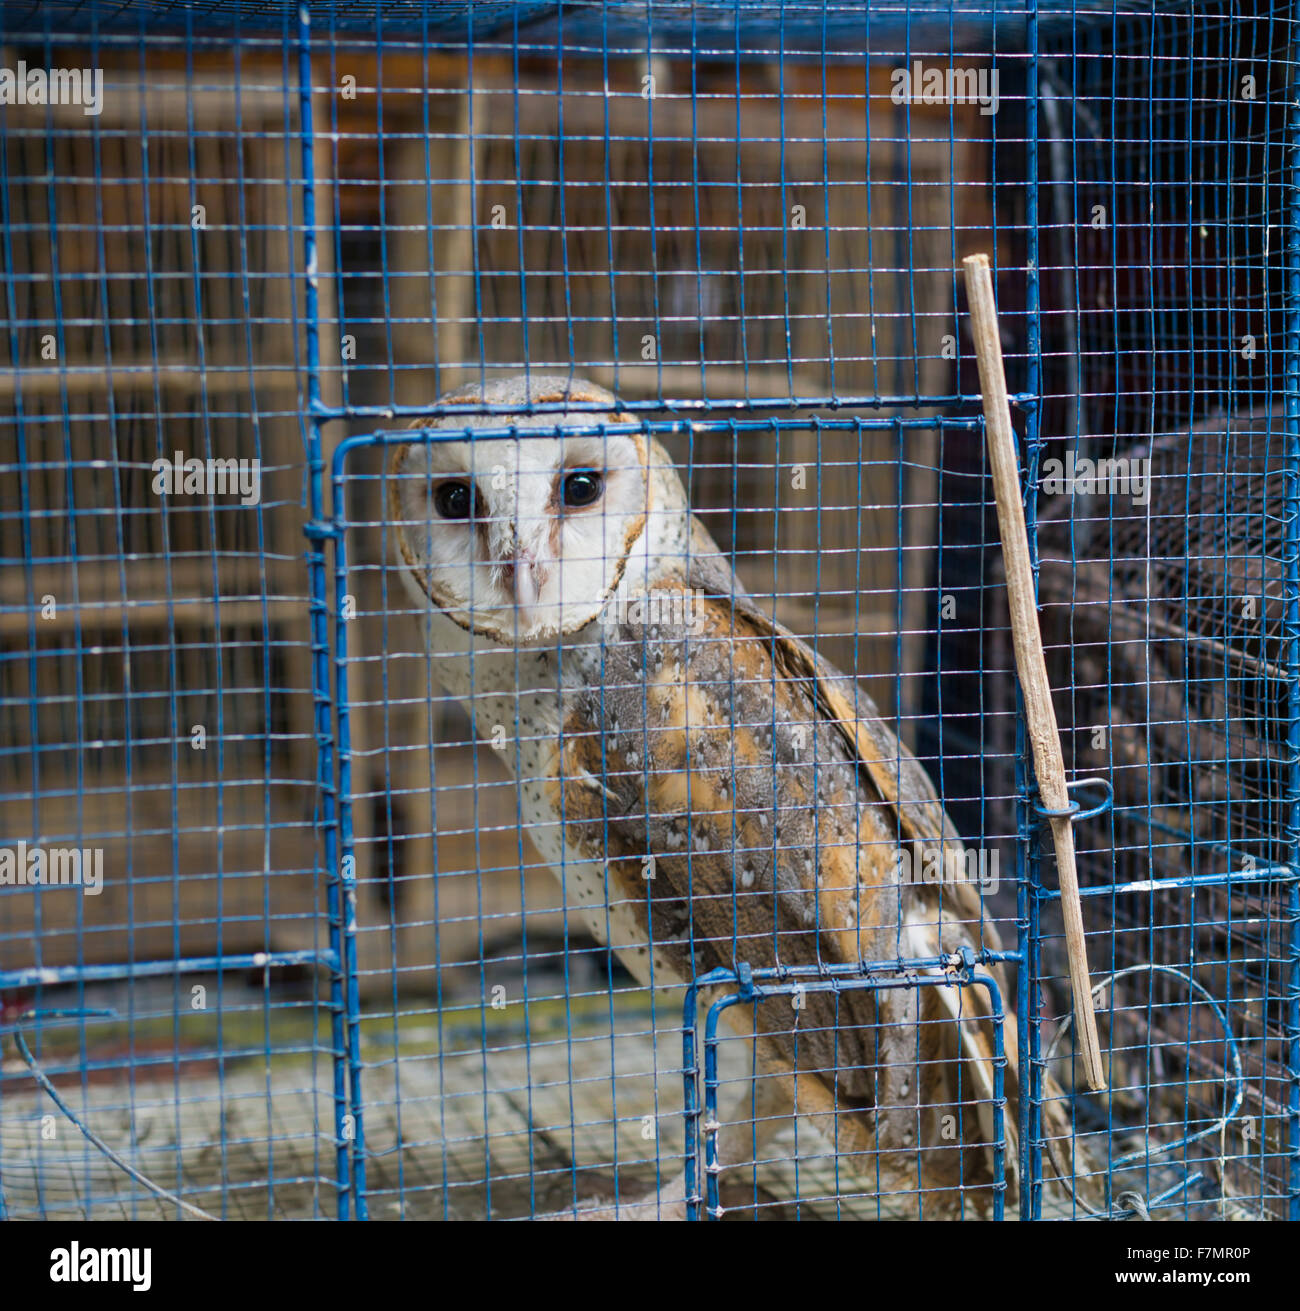 An owl is in the cage Stock Photo - Alamy